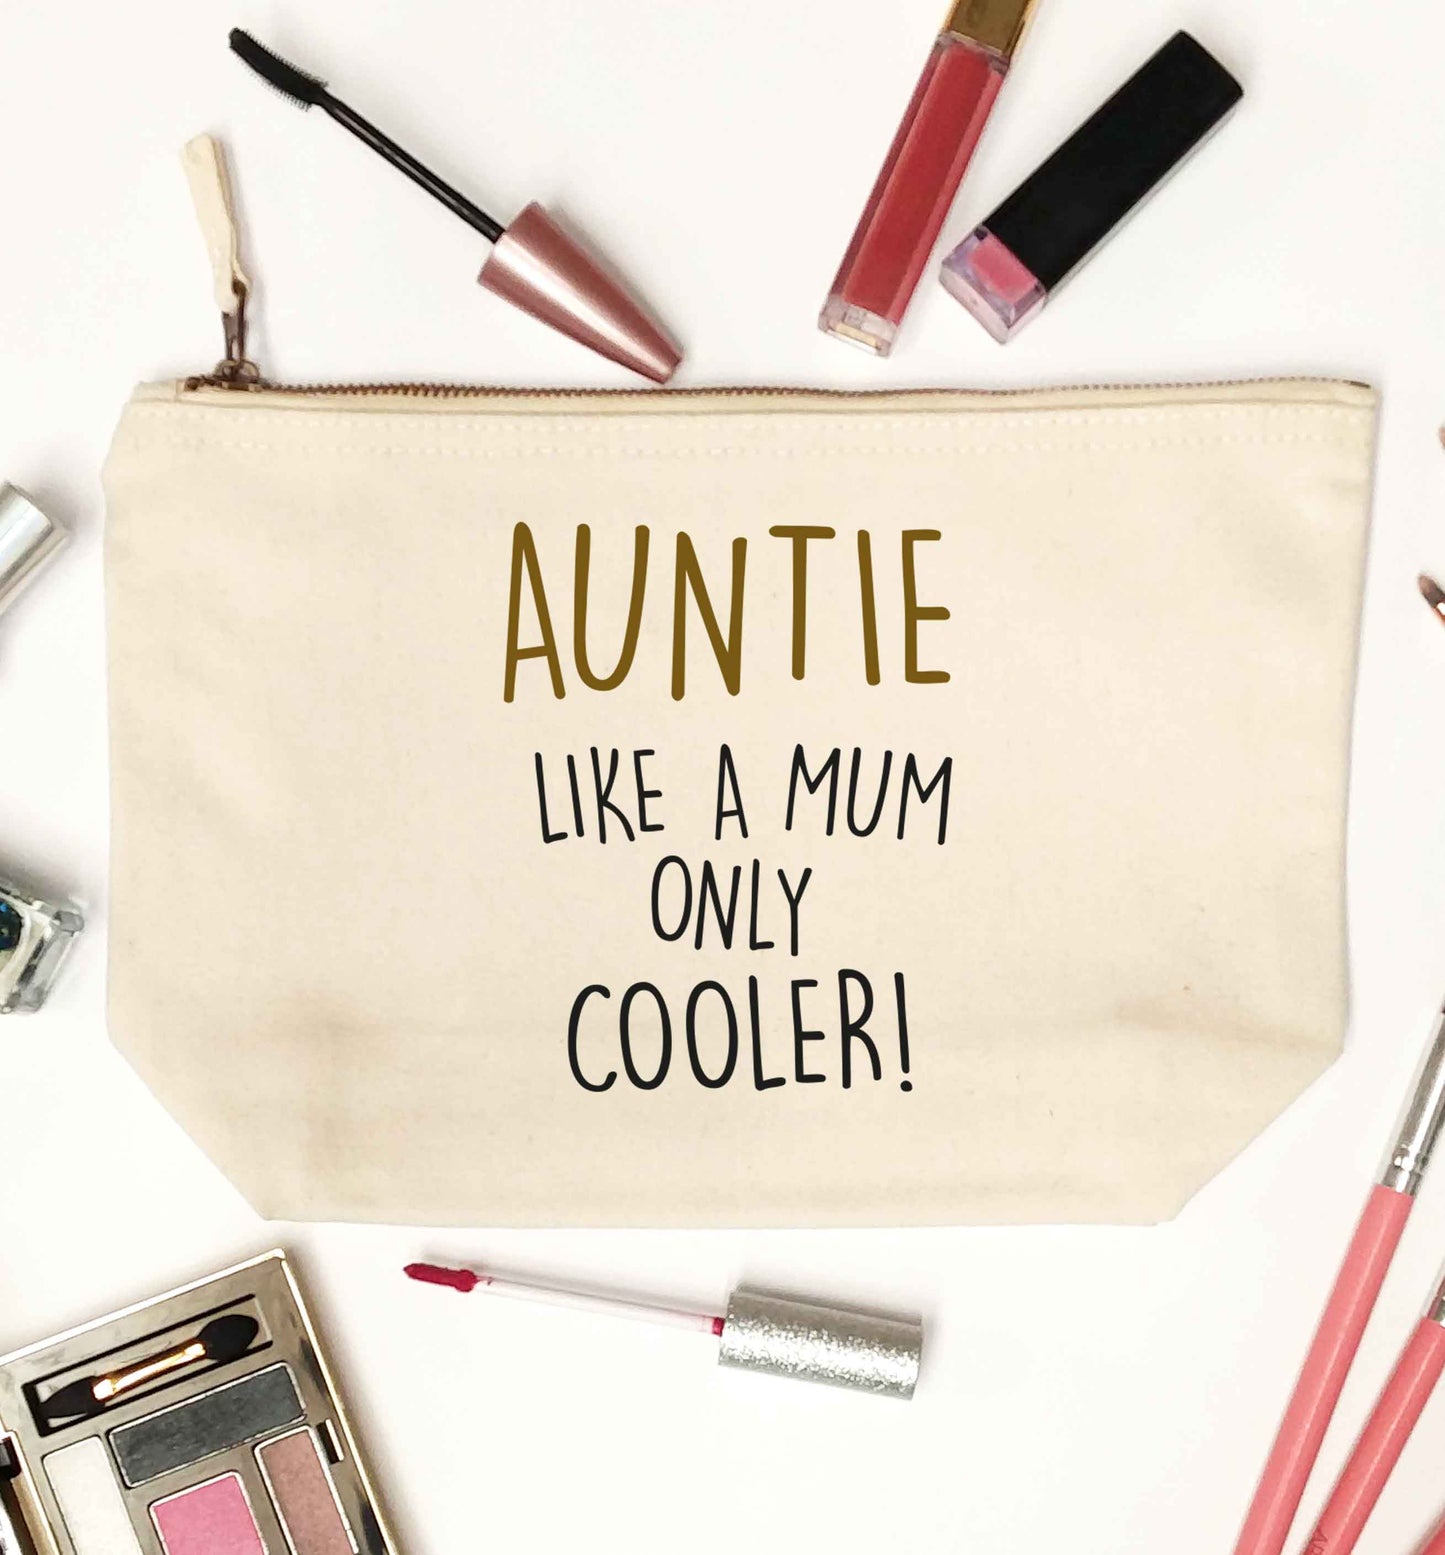 Auntie like a mum only cooler natural makeup bag